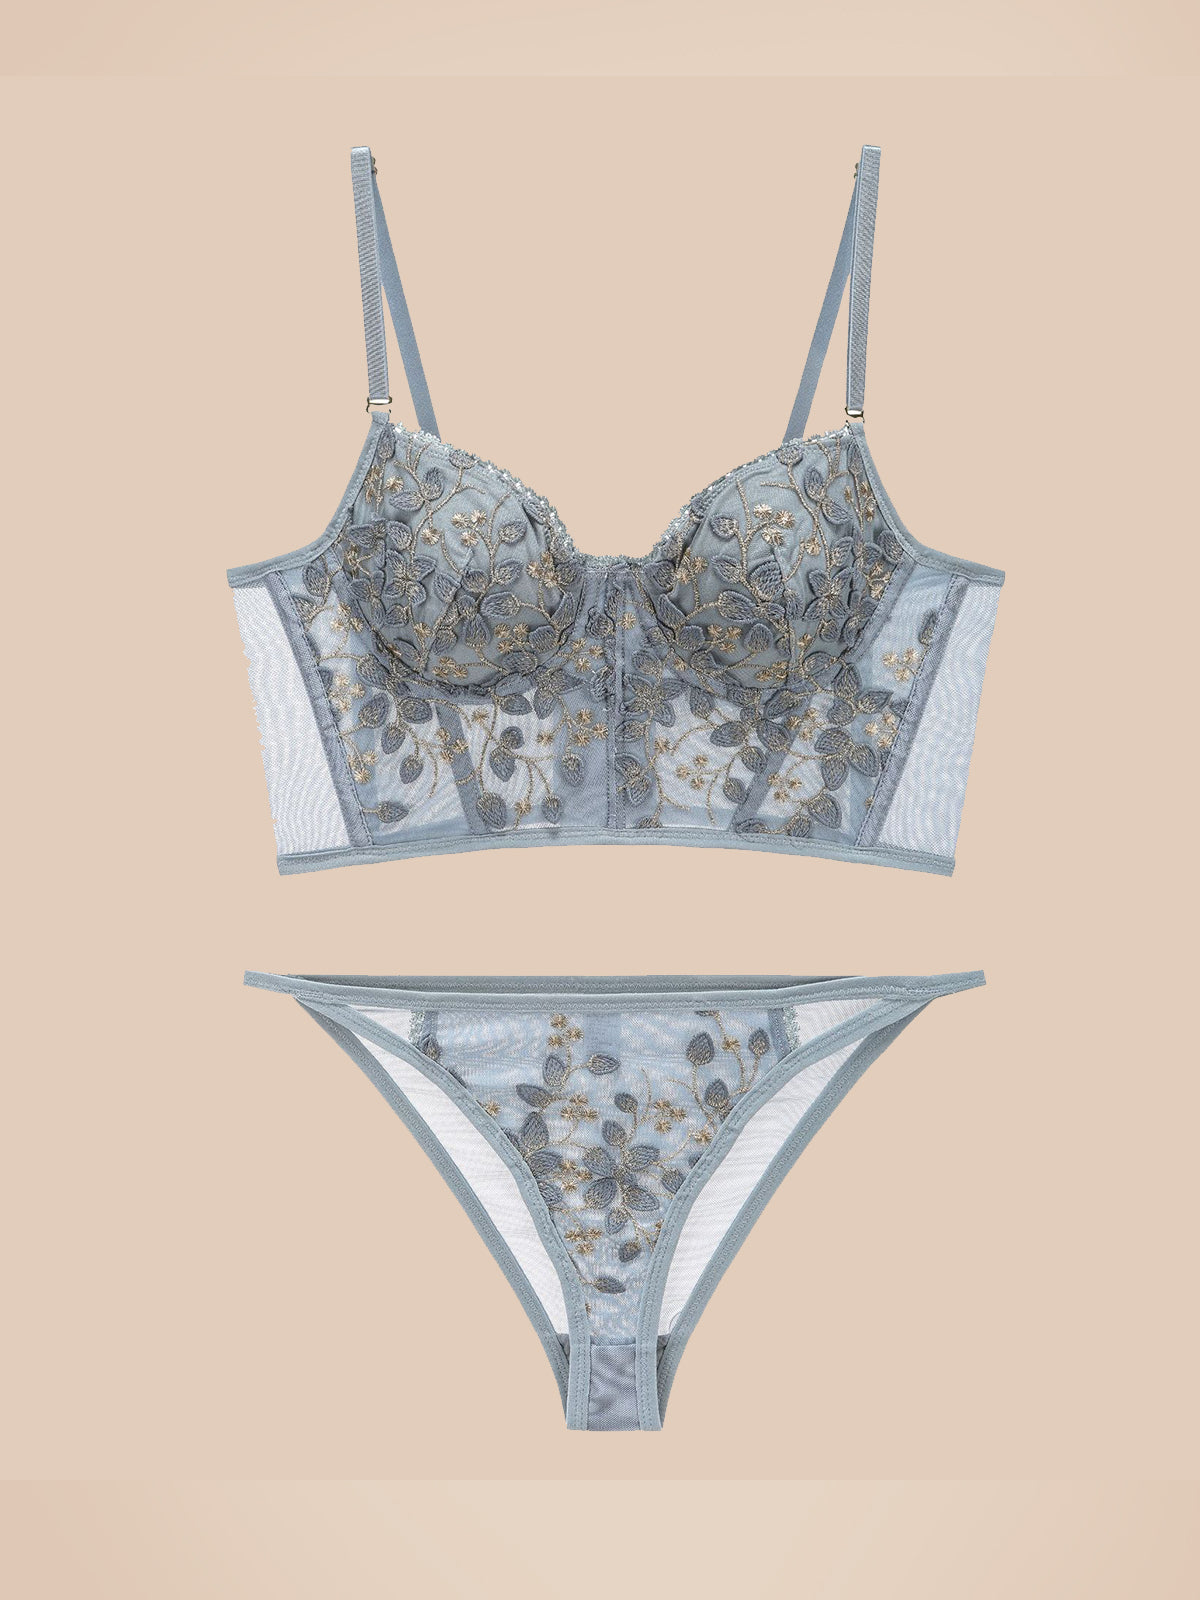 Embroidered Lace and Steel Bone Overlay French Lingerie Bra